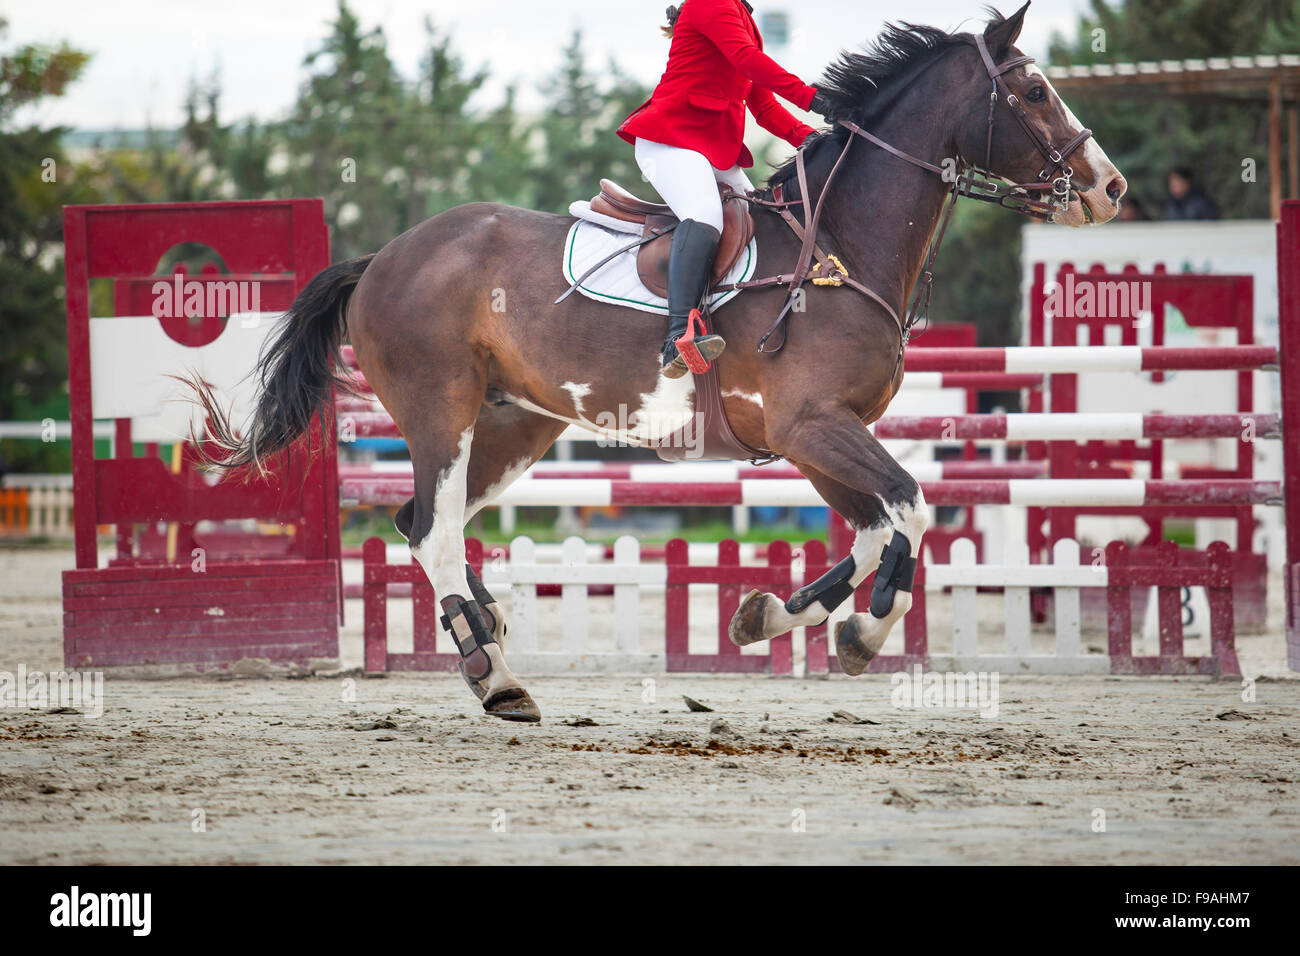 Horse trotting before overtaking the obstacle at horse jumping competition Stock Photo